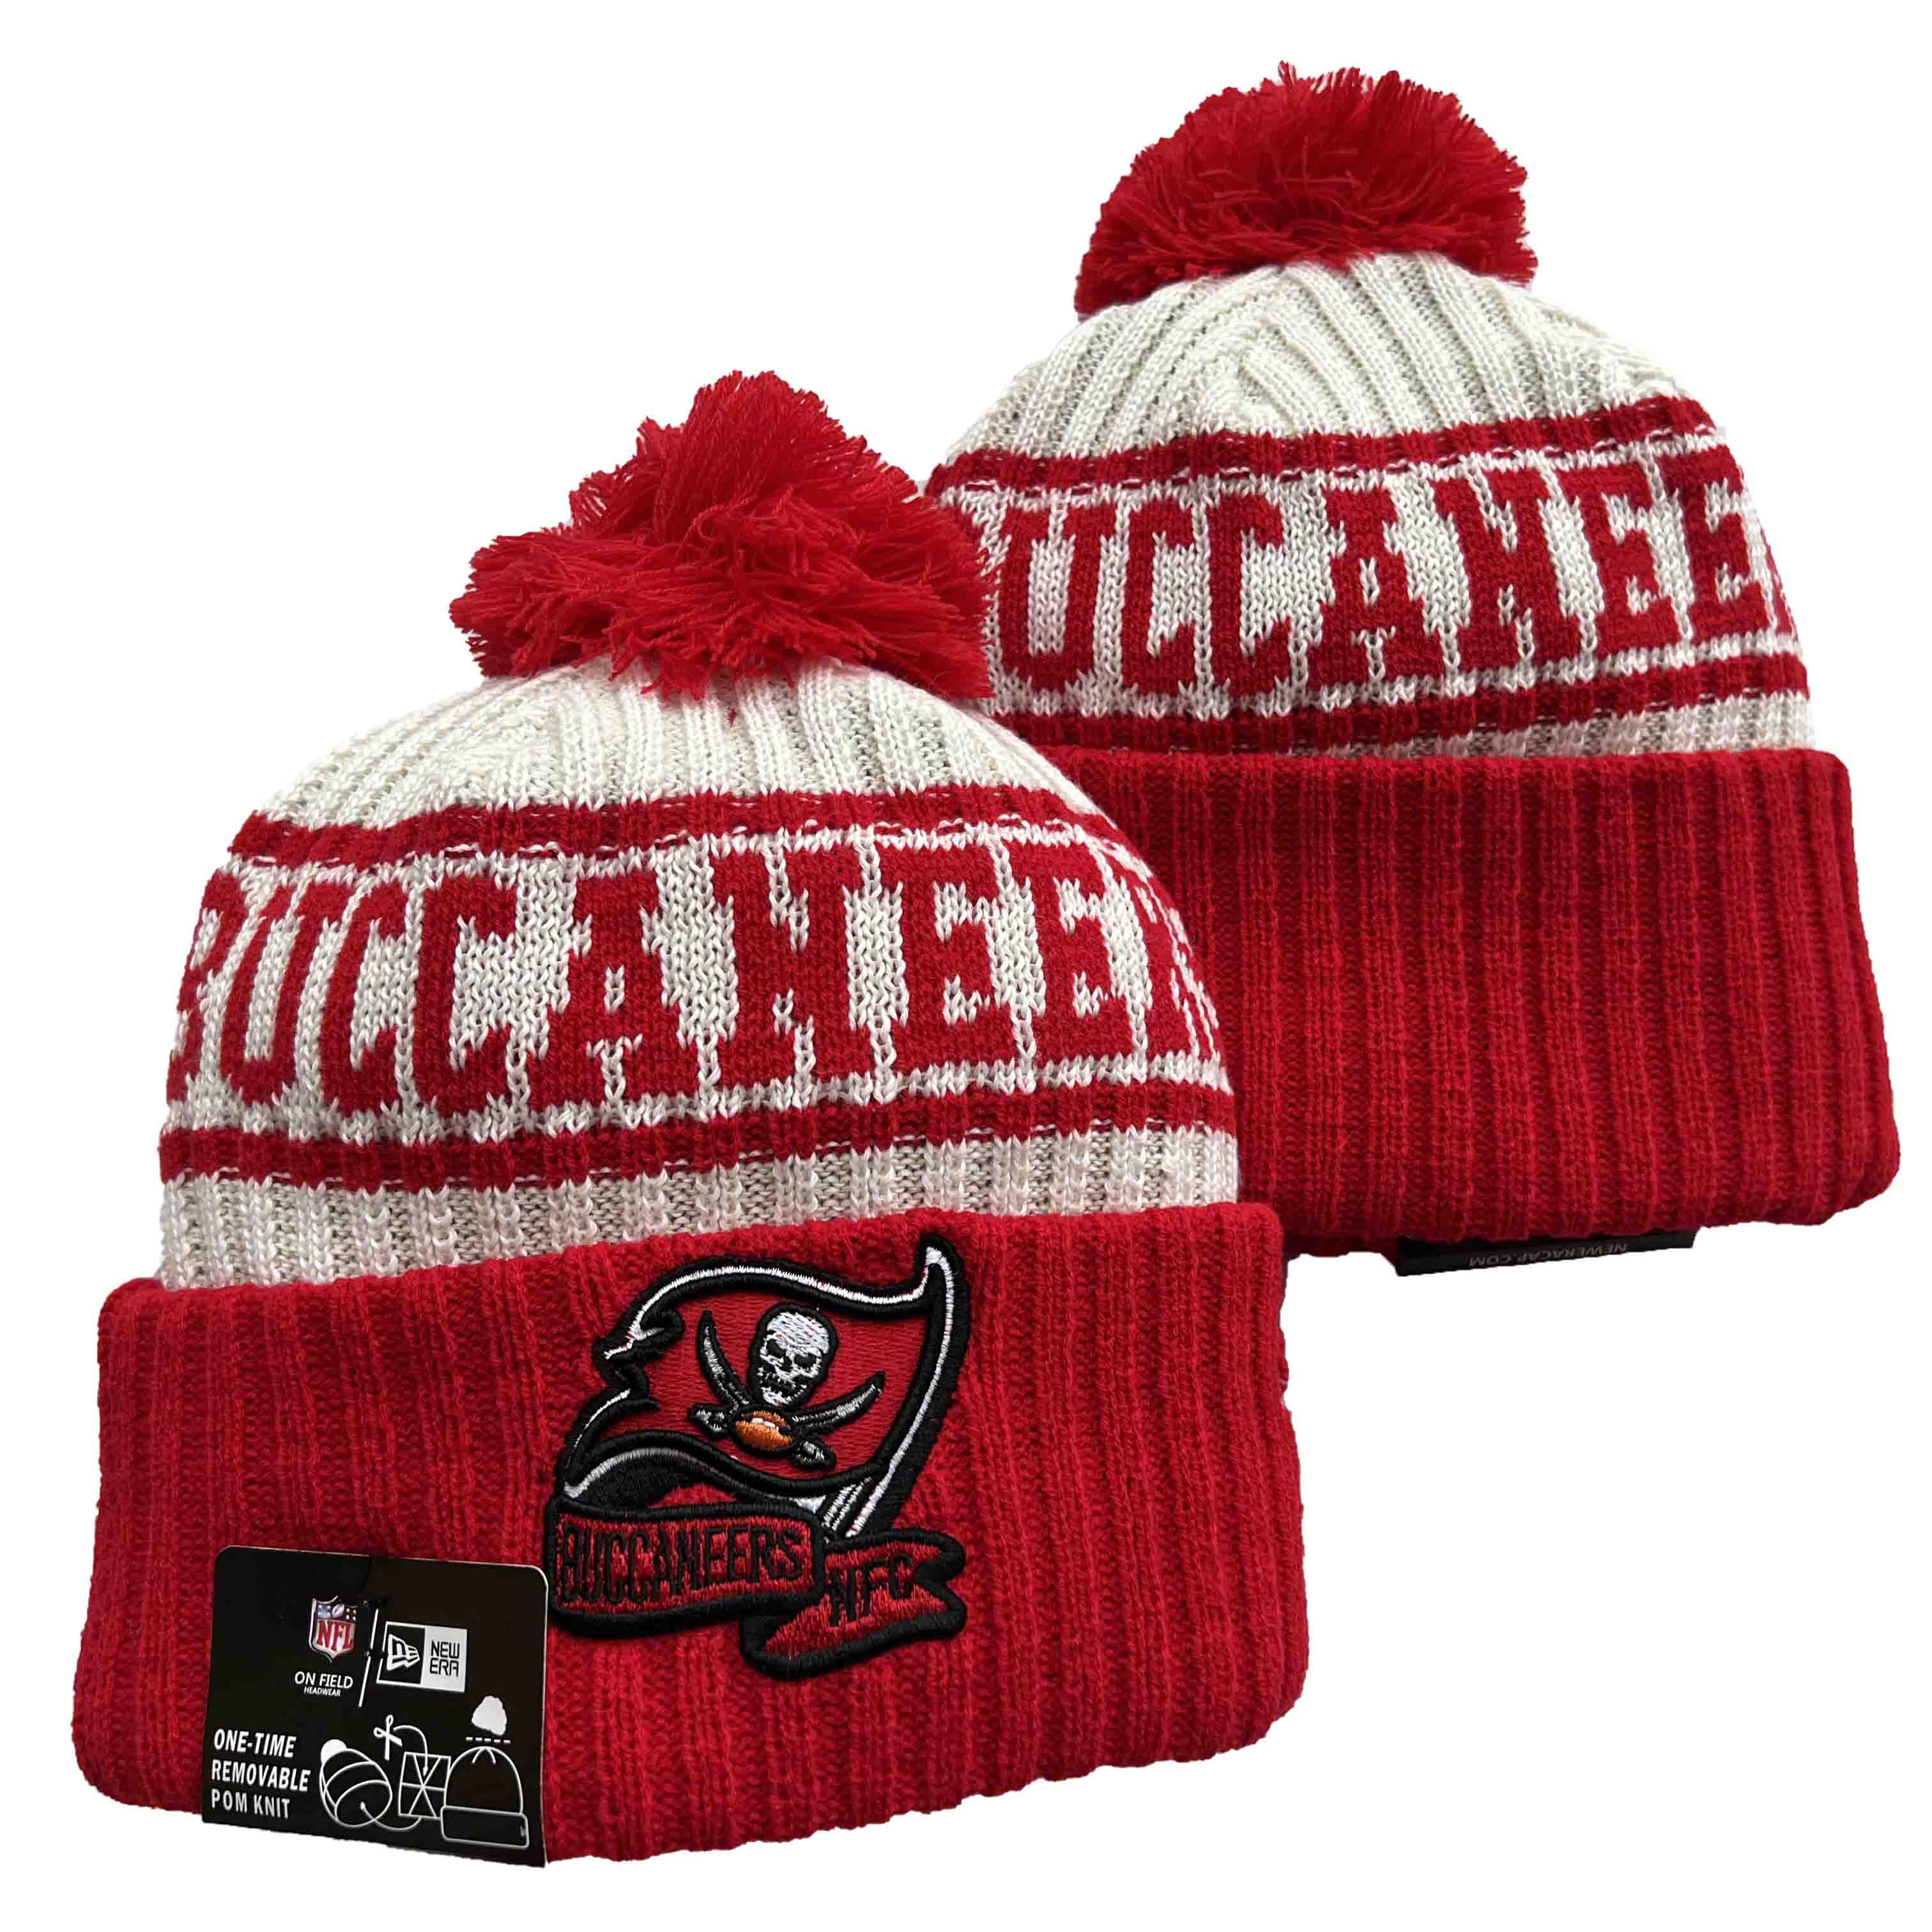 Tampa Bay Buccaneers Knit Hats 0212